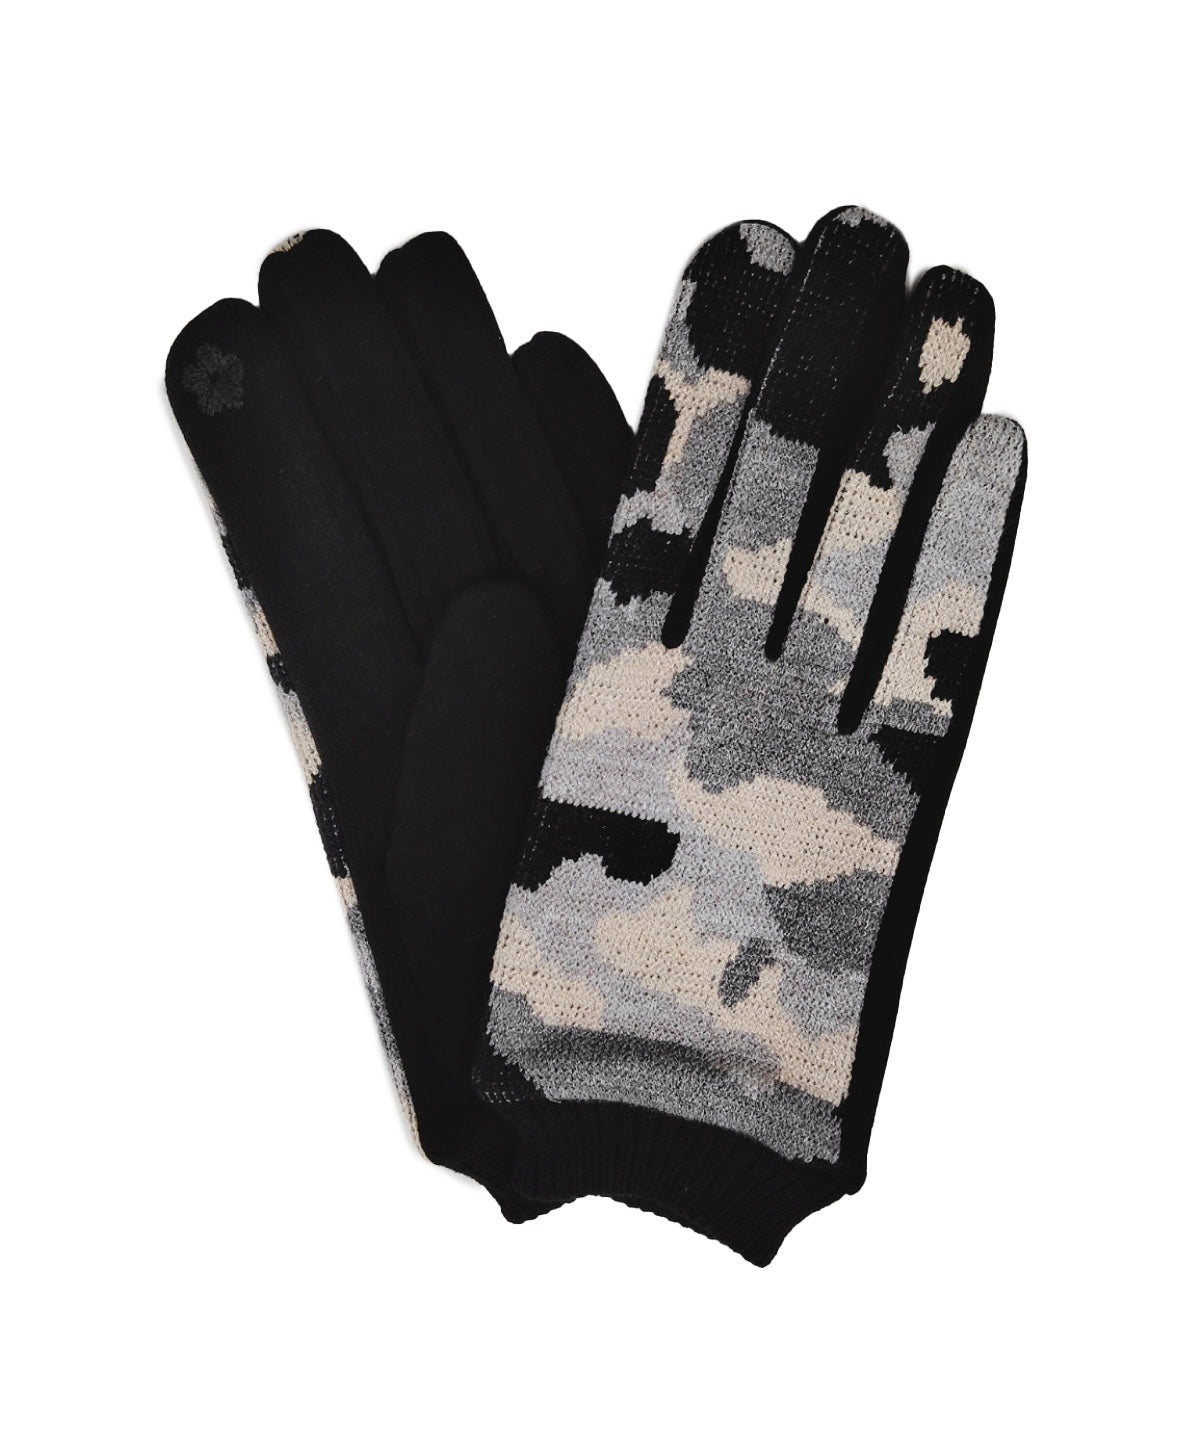 Shop for KW Fashion Camo Touch Gloves at doeverythinginloveny.com wholesale fashion accessories